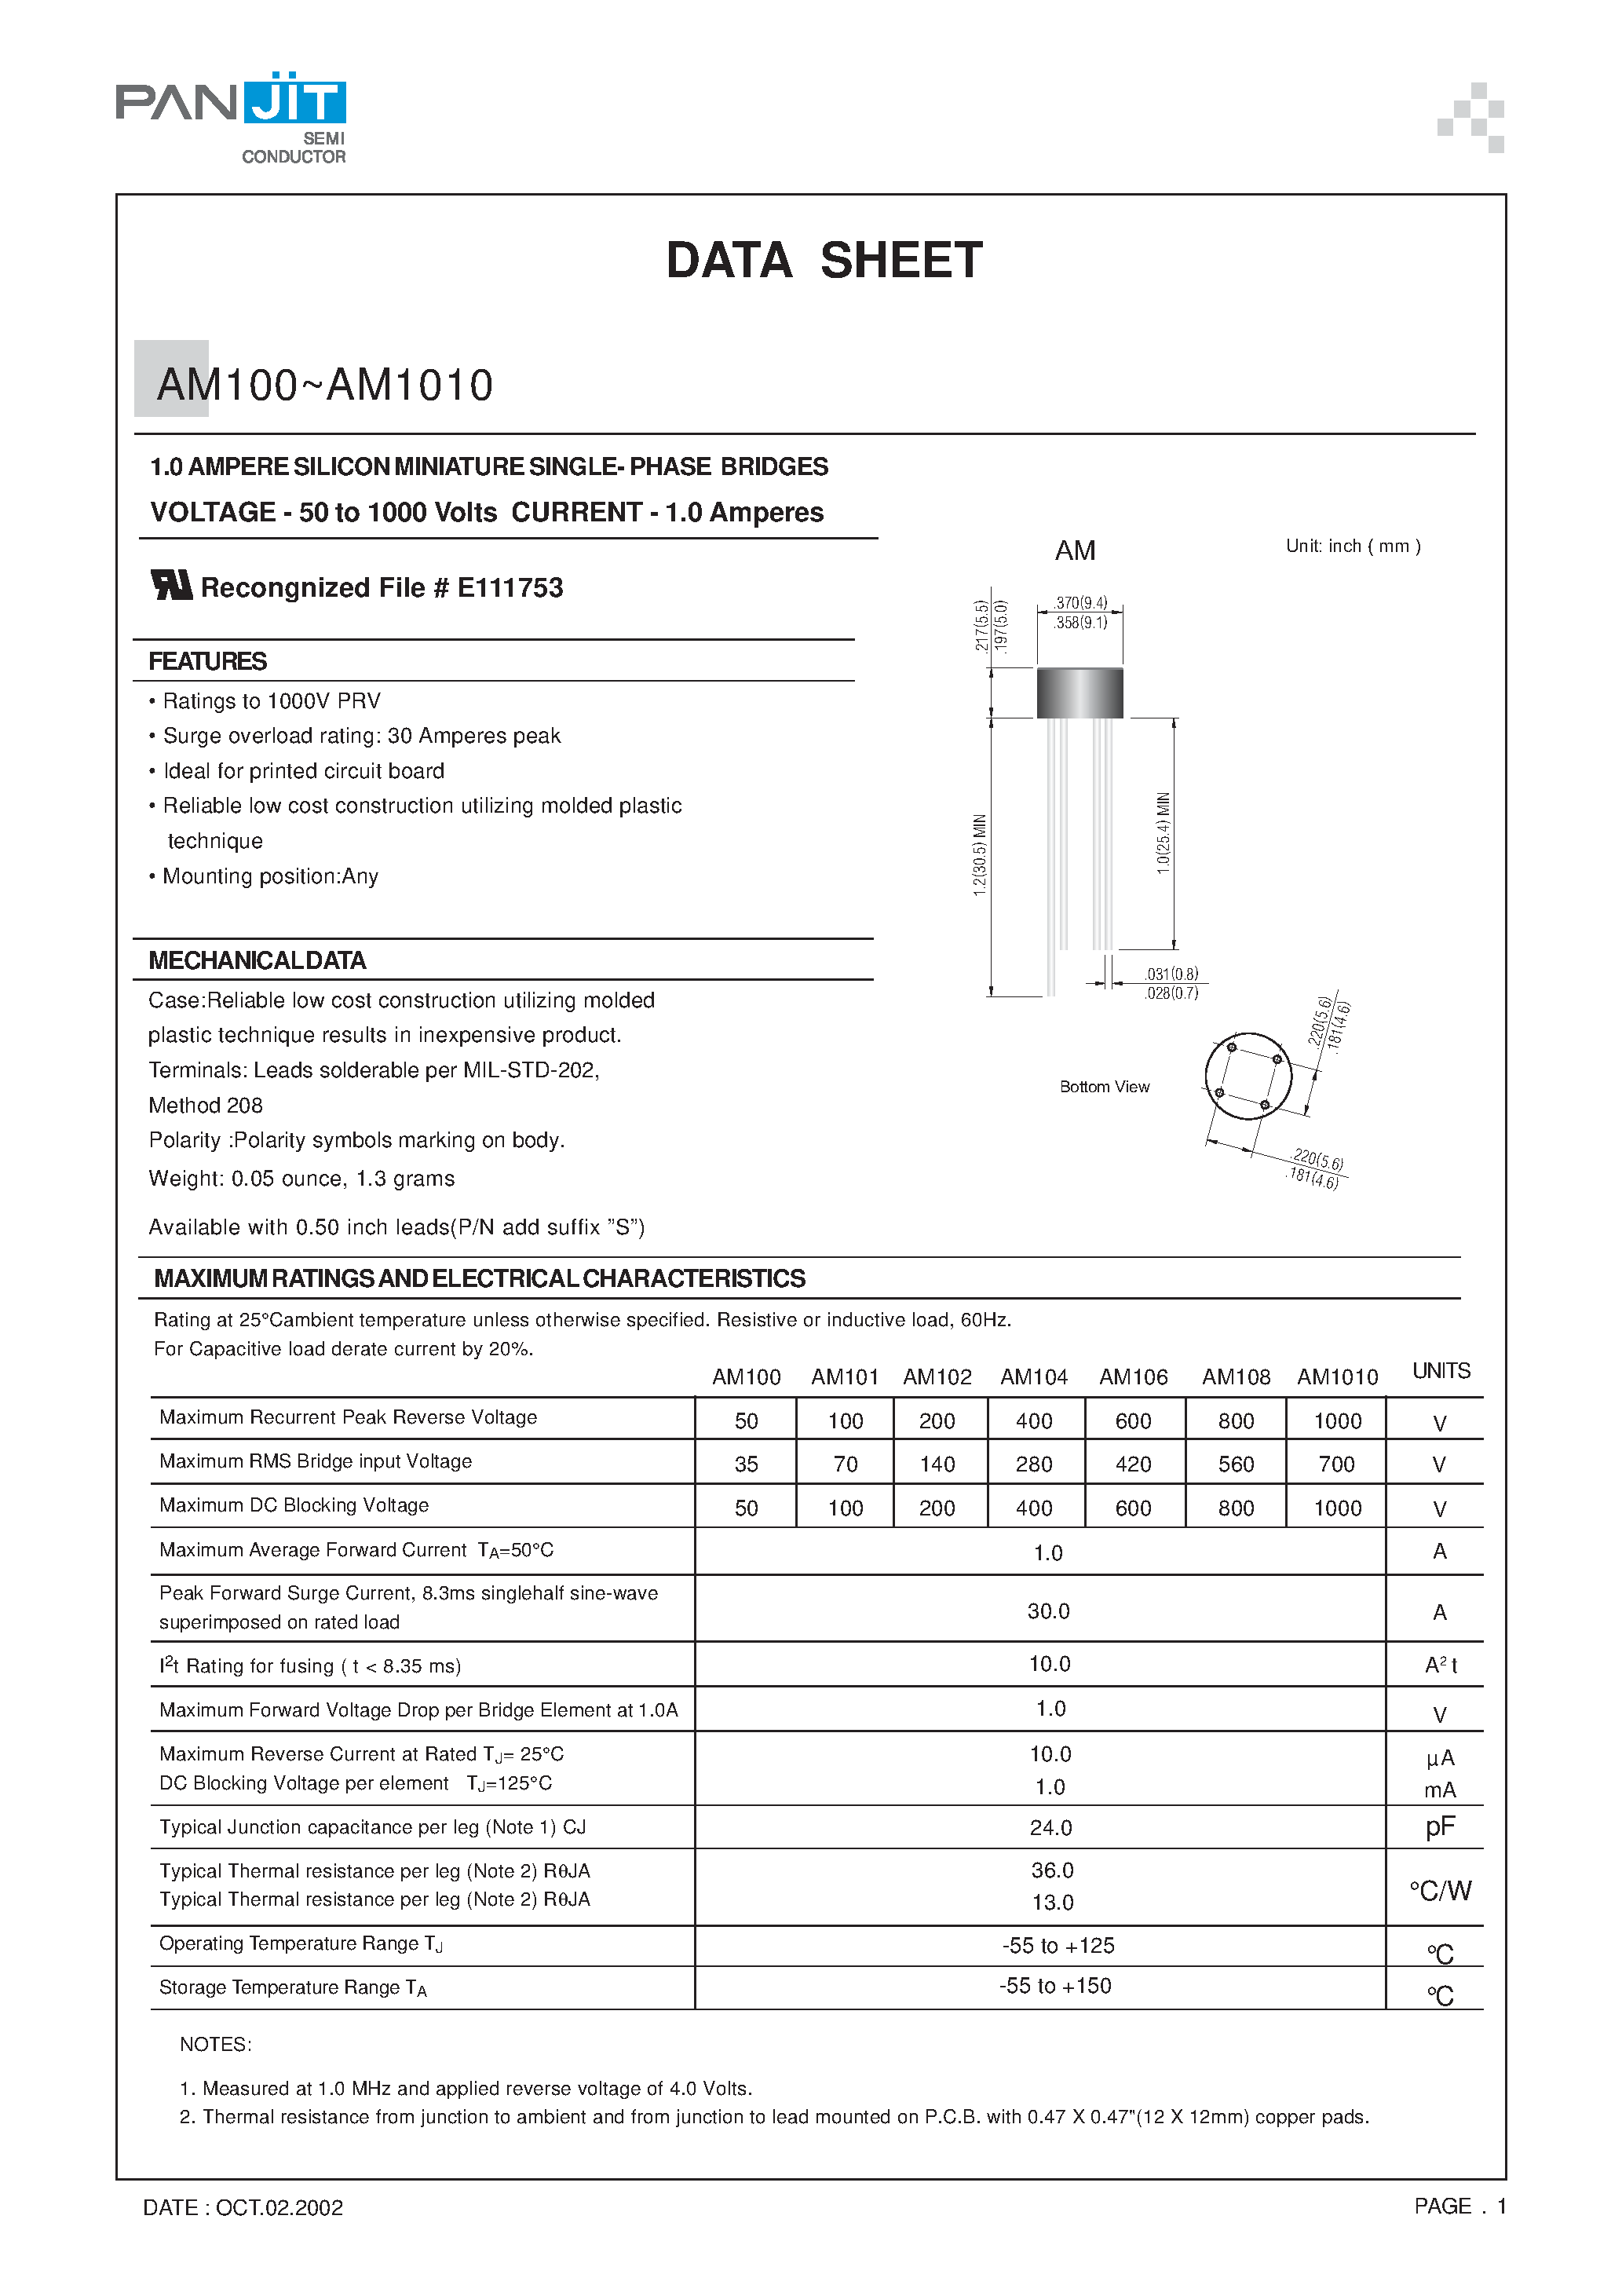 Datasheet AM102 - 1.0 AMPERE SILICON MINIATURE SINGLE- PHASE BRIDGES(VOLTAGE - 50 to 1000 Volts CURRENT - 1.0 Amperes) page 1